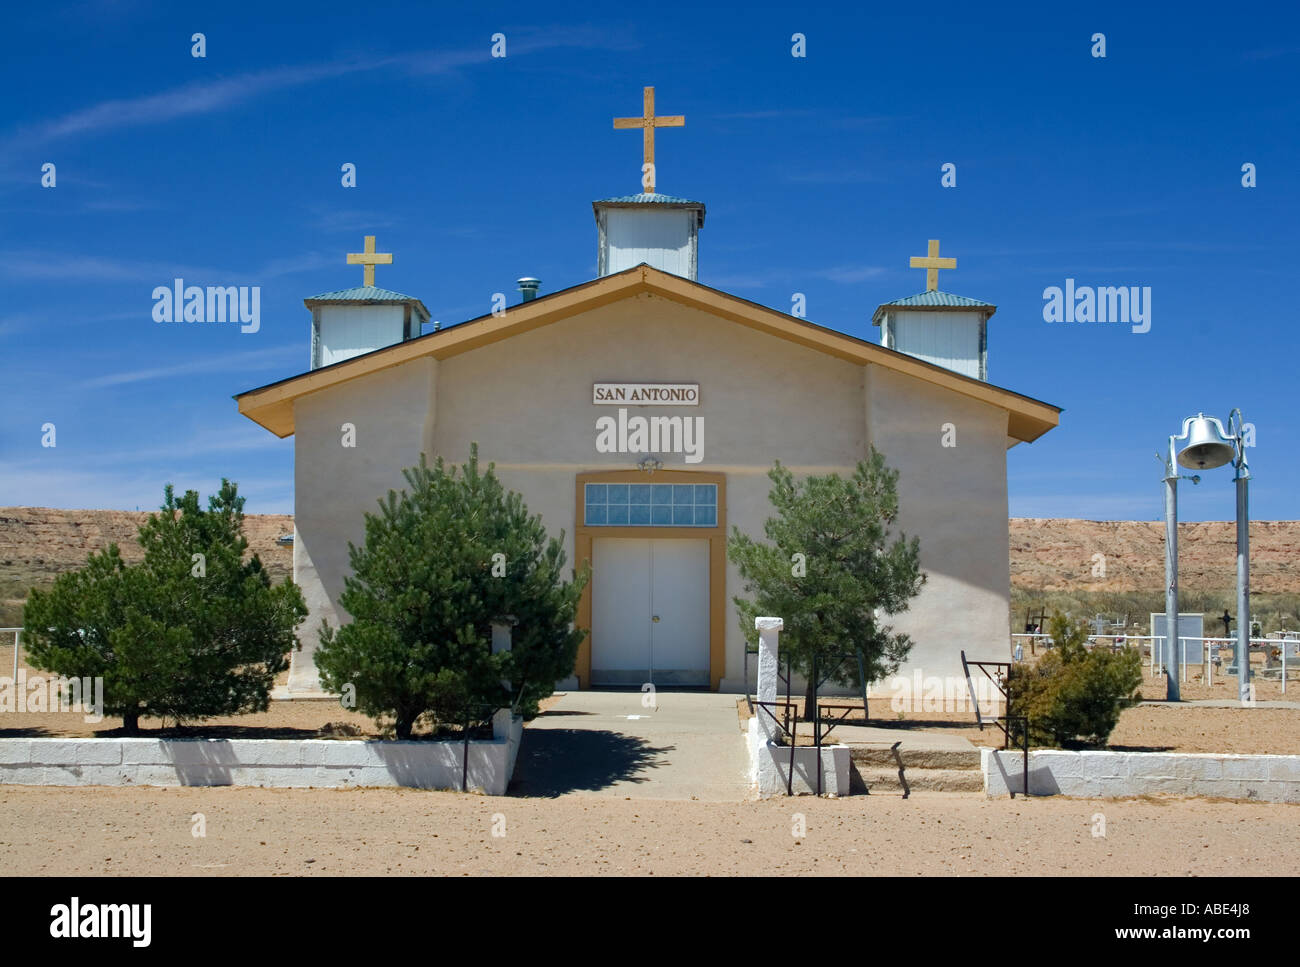 Exterior of the San Antonio Mission located at the Piro Indian Pueblo in New Mexico Stock Photo